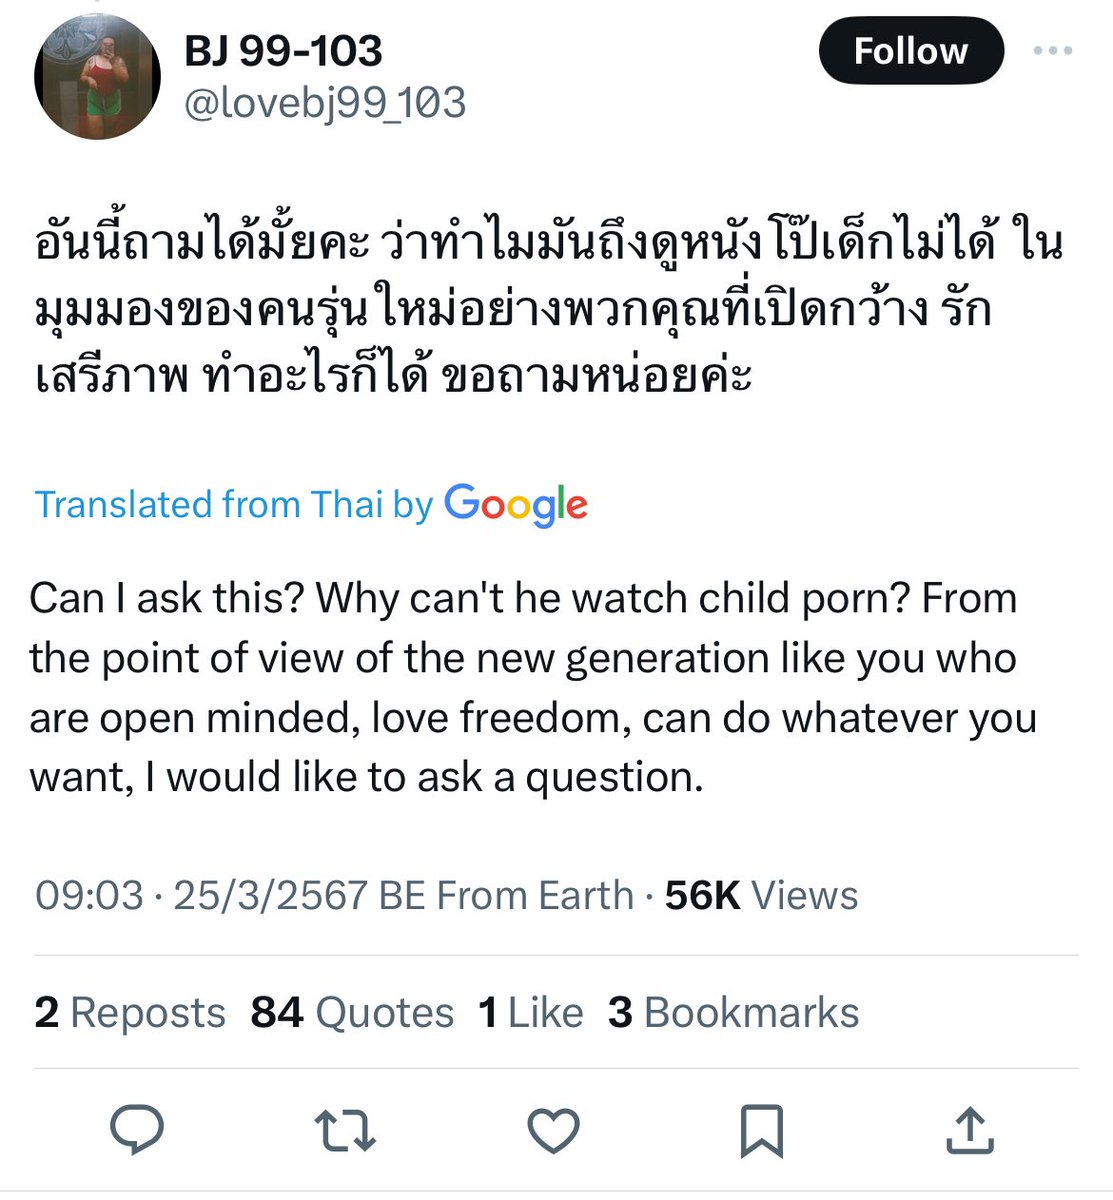 every fucking day on thai twt 🤢🤢🤢🤢🤢🤢🤢🤢🤢🤢🤢🤢🤢🤢🤢🤢🤢🤢🤢🤢🤢🤢🤢🤢🤢🤢